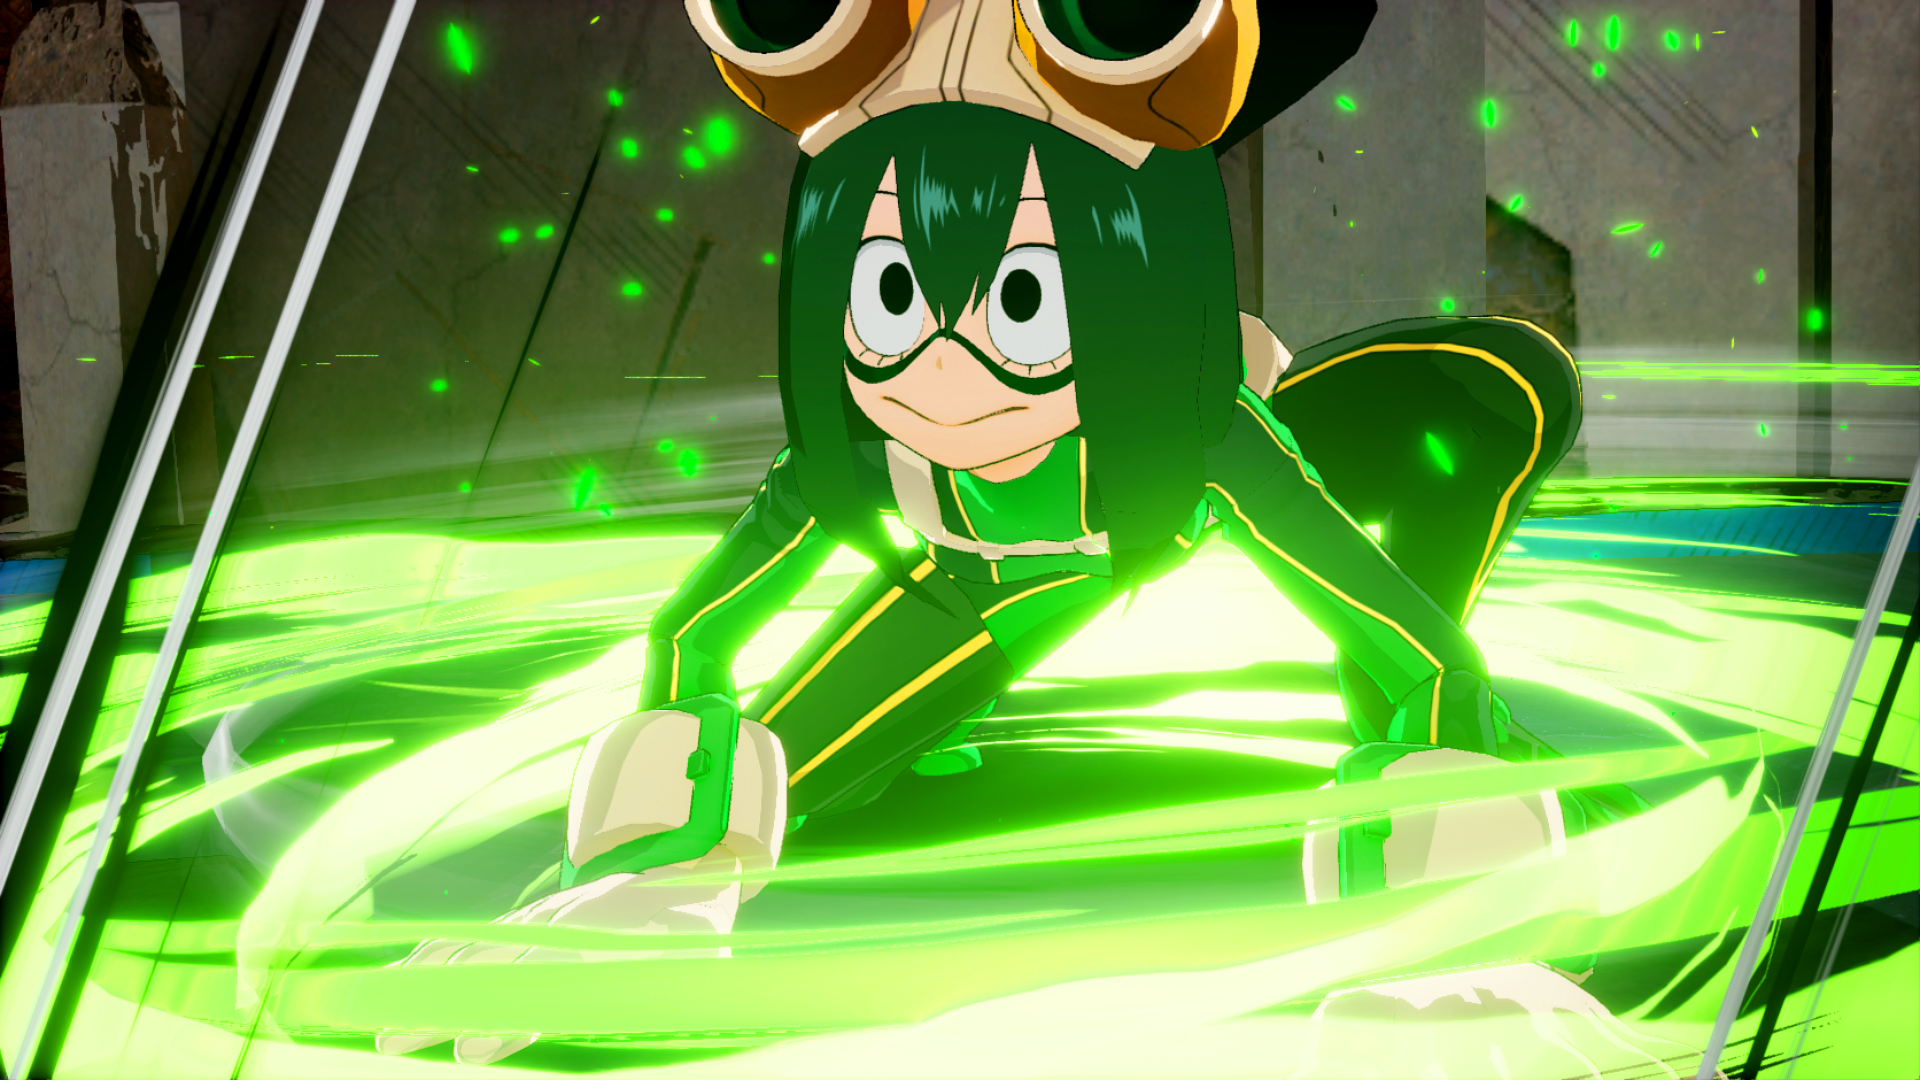 Tsuyu, Denki, and Momo join the My Hero Academia: One's Justice roster